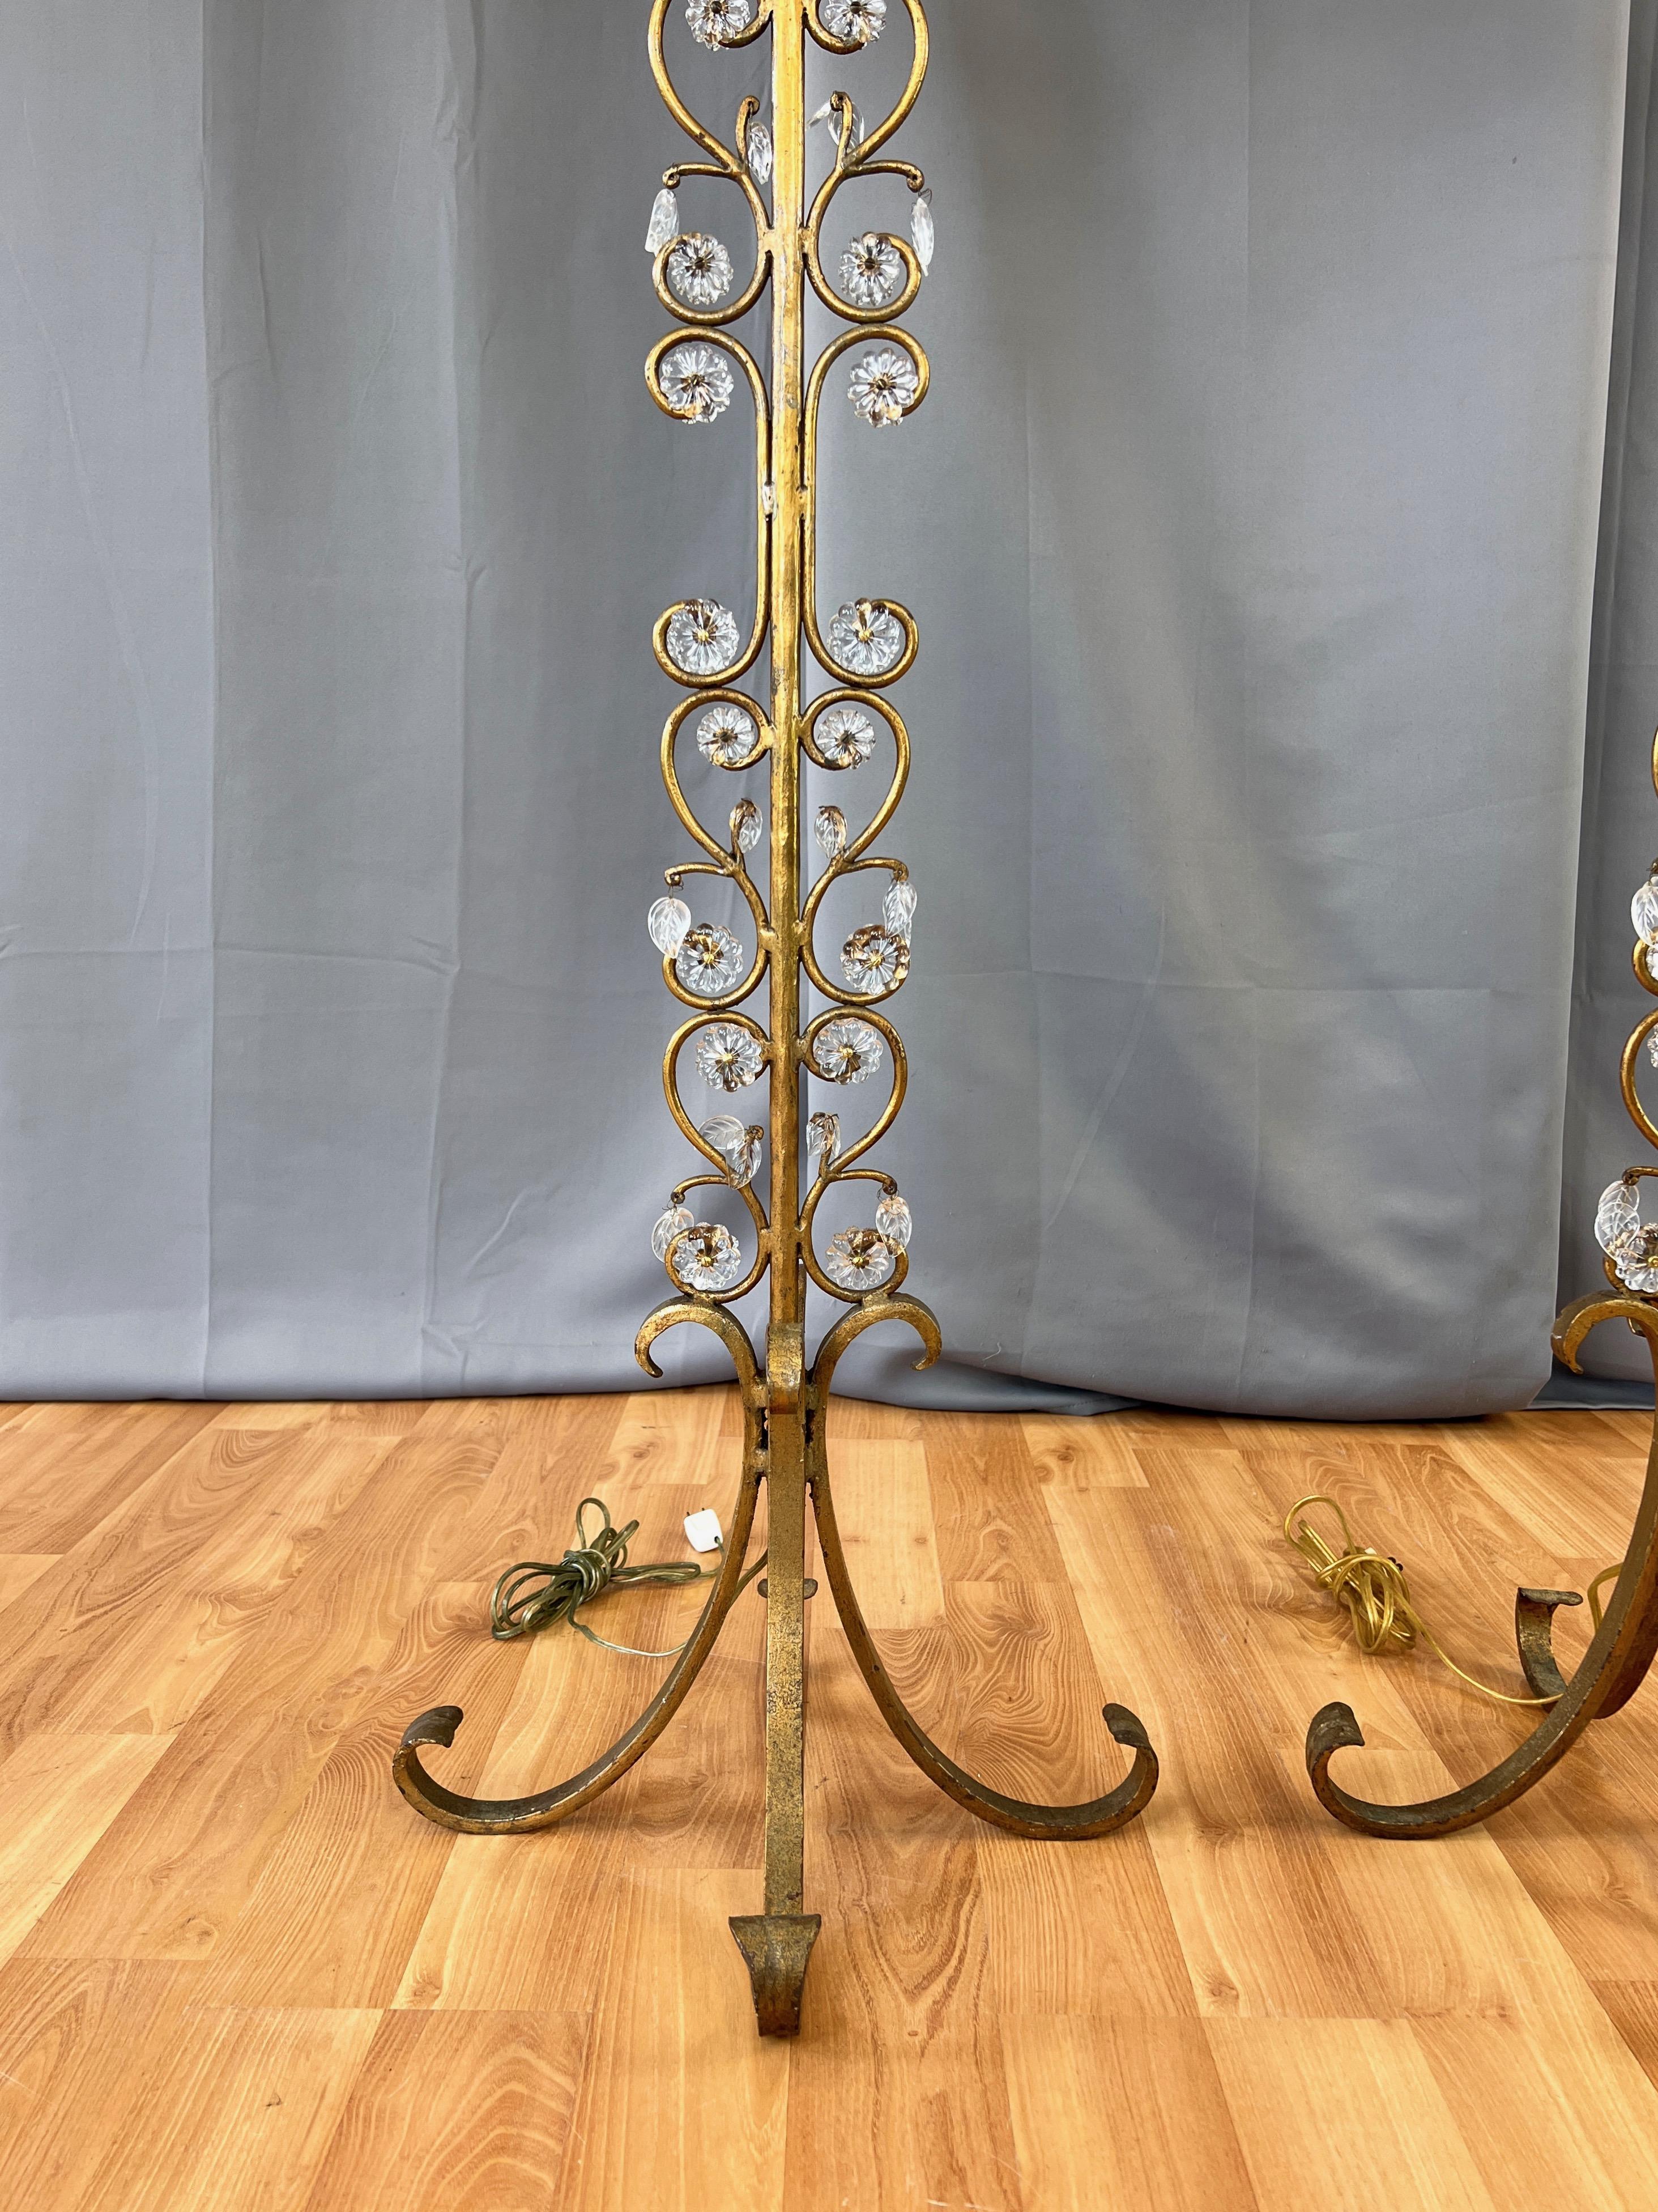 Pair of Italian Gilt Wrought Iron Floor Lamps with Glass Florets & Leaves, 1950s For Sale 2